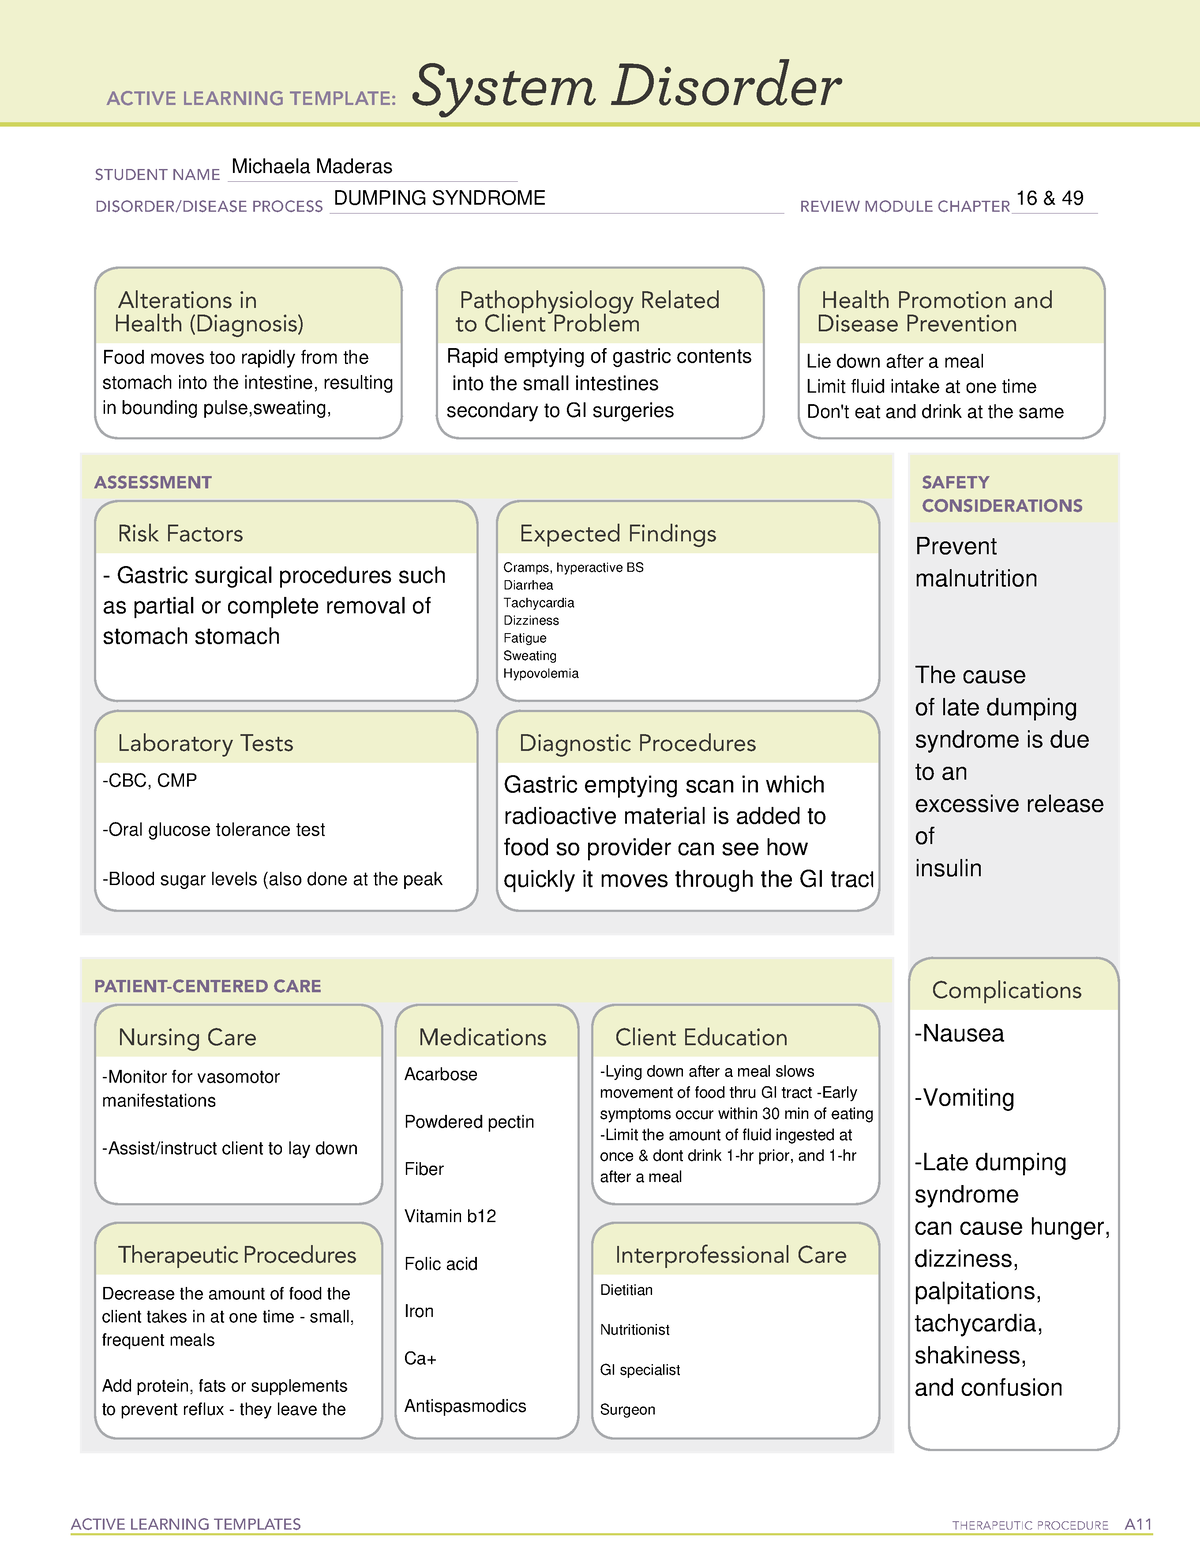 dumping-syndrome-active-learning-templates-therapeutic-procedure-a